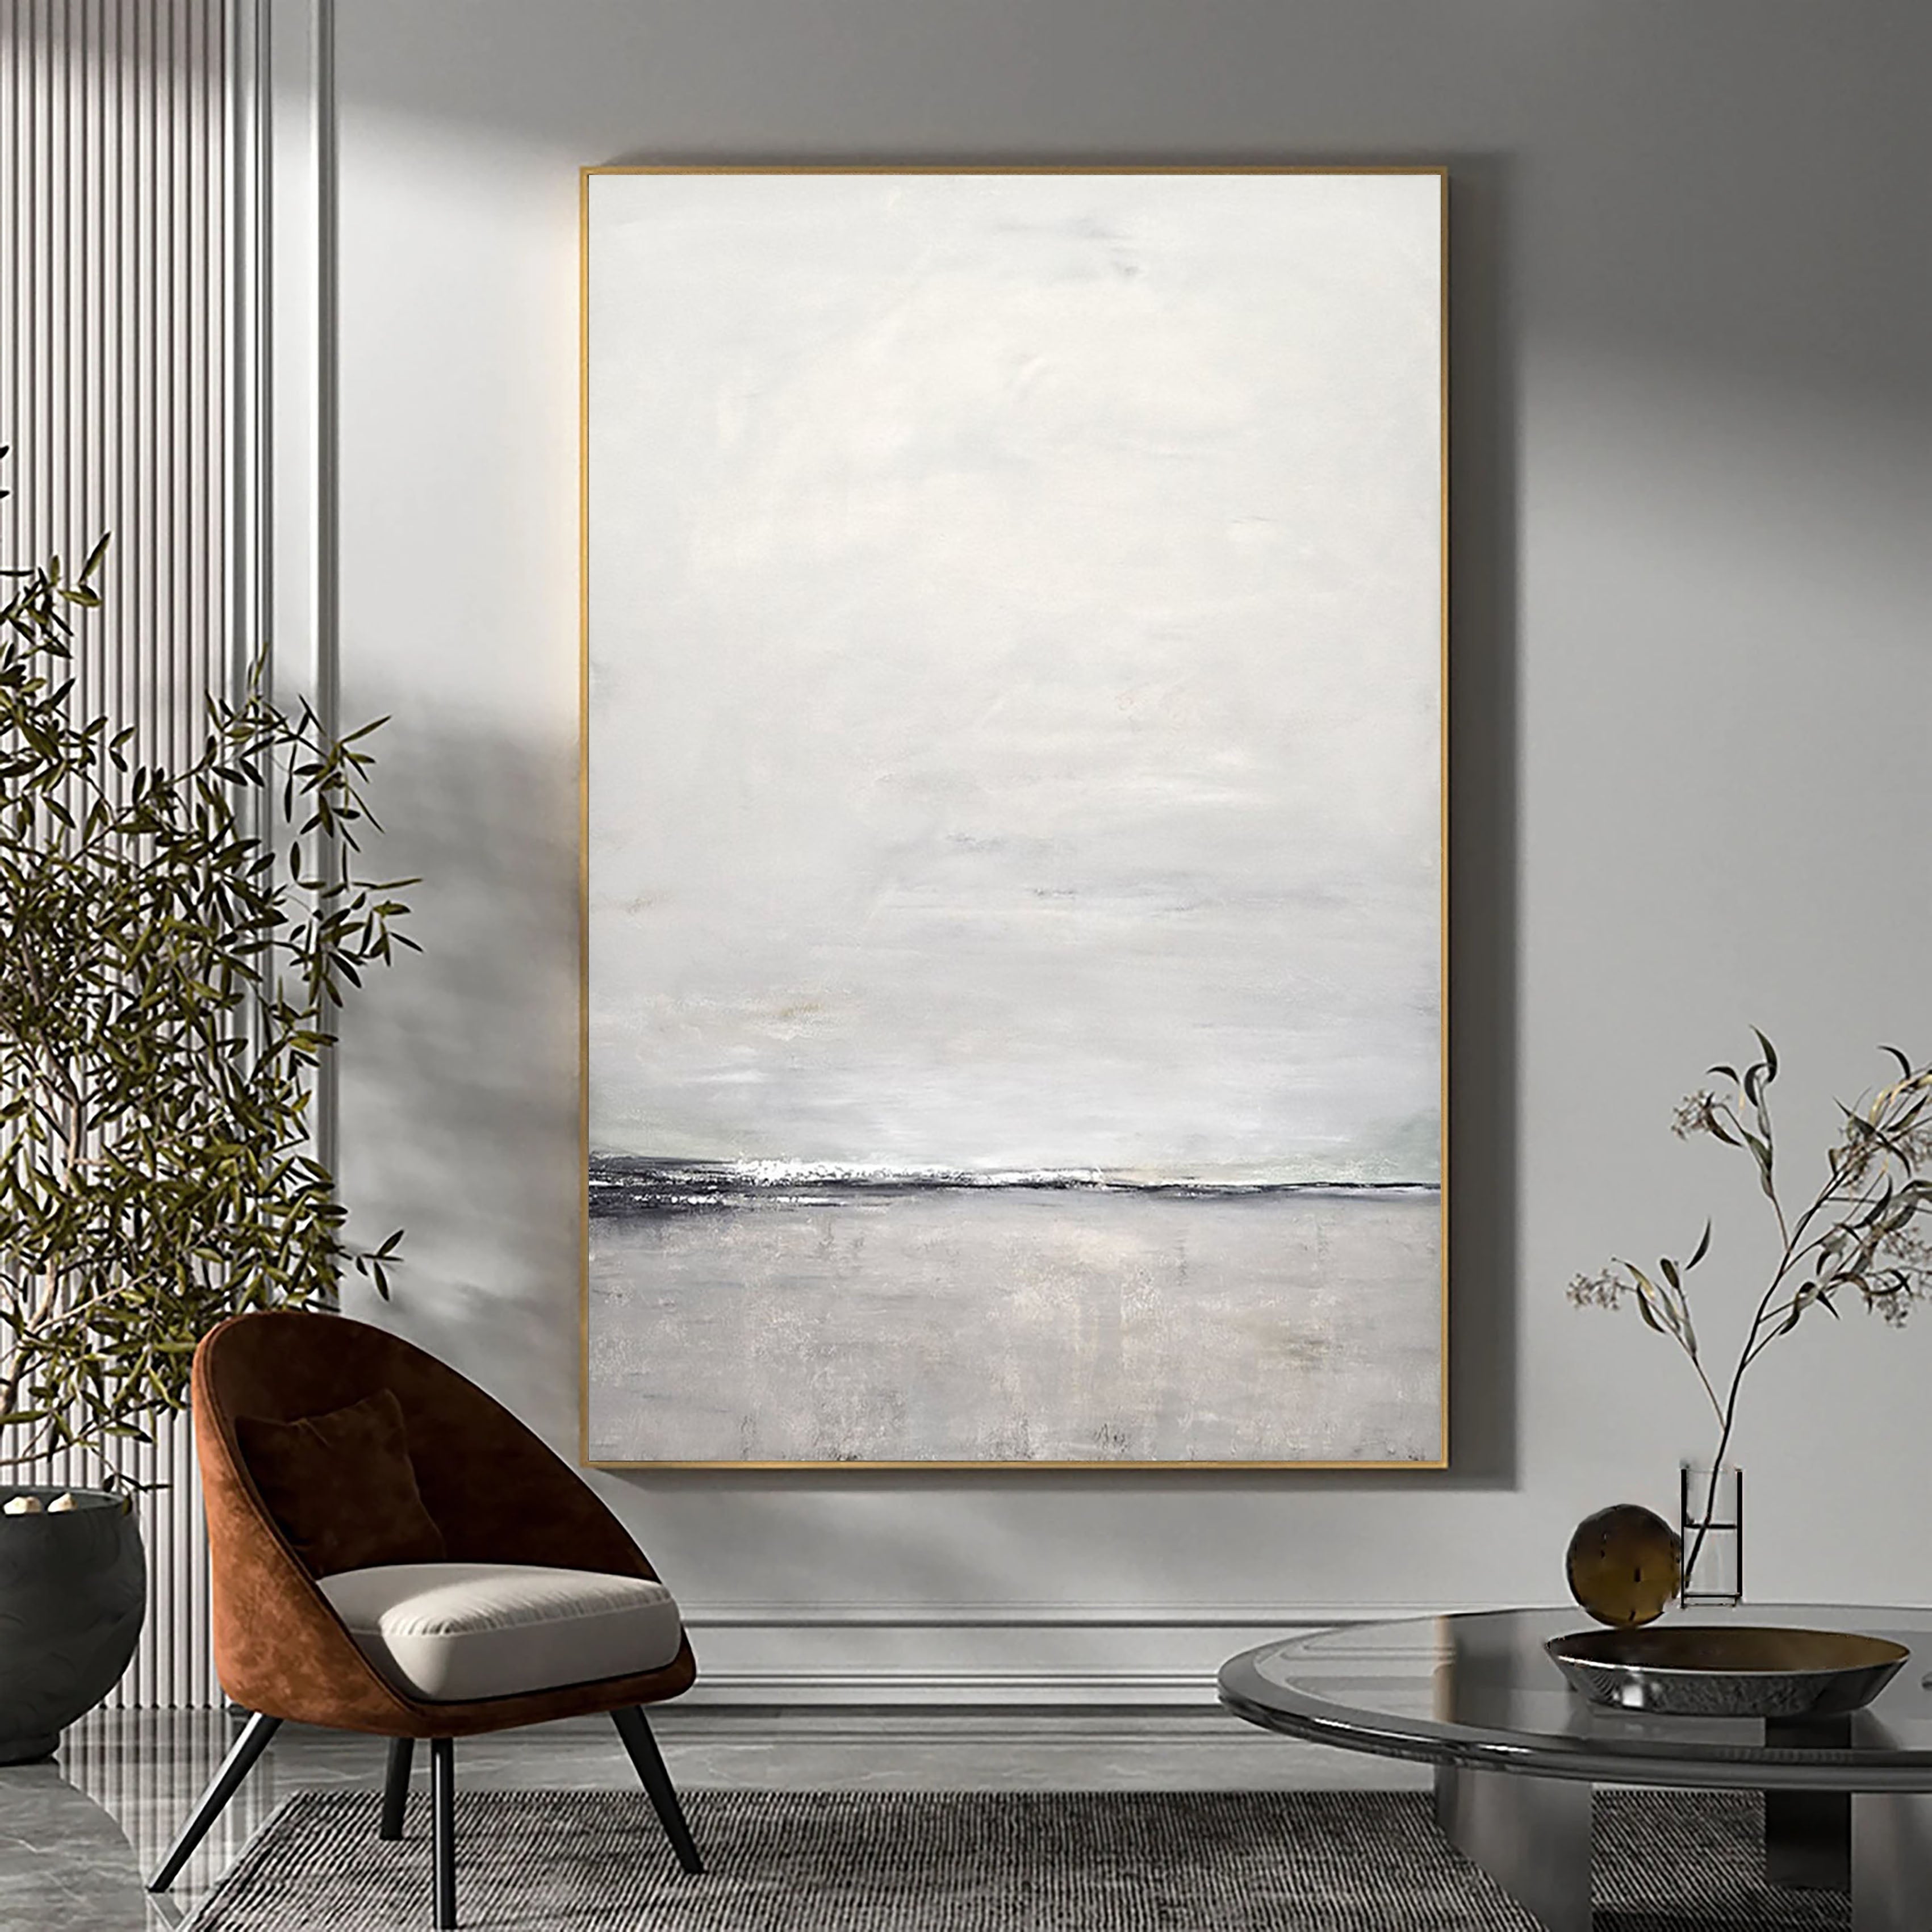 Large Sky and Sea Painting, Beach Scene Canvas, Original Large Ocean Painting, Blue Green Sky Painting For Living Room